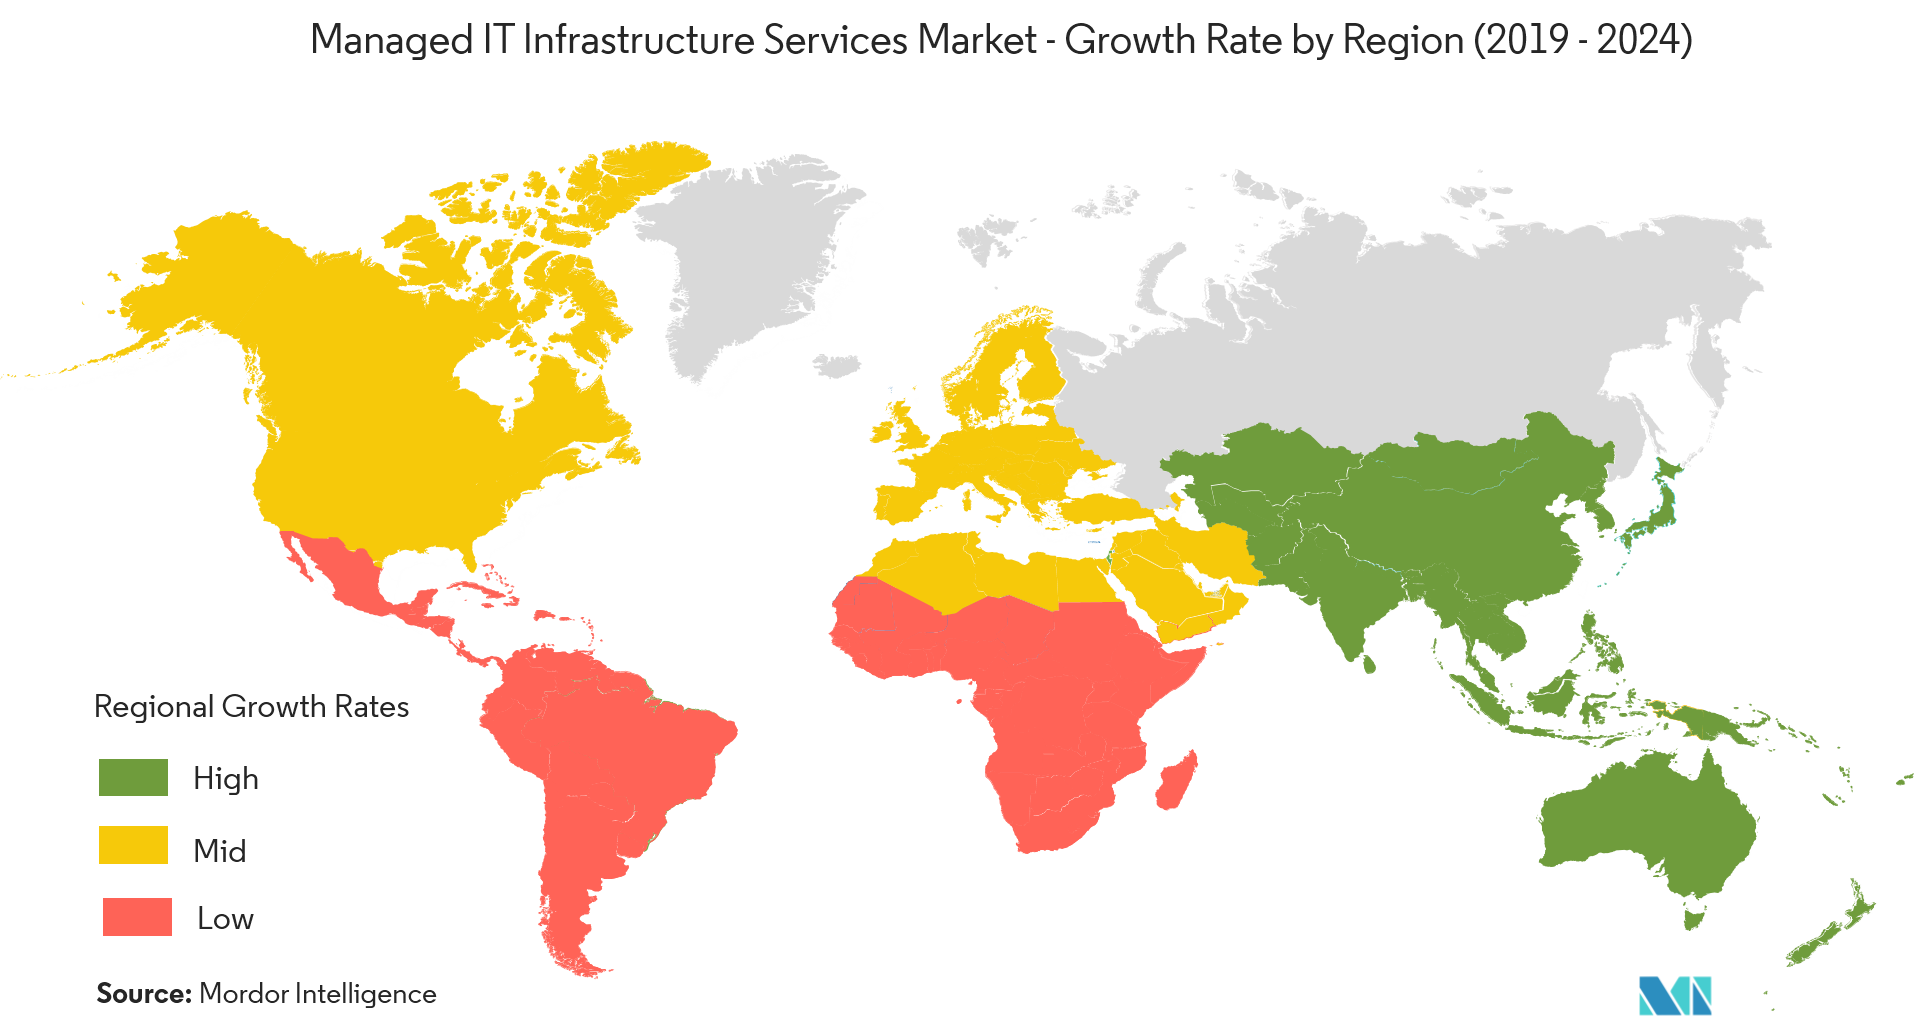 Managed IT Infrastructure Services Market share